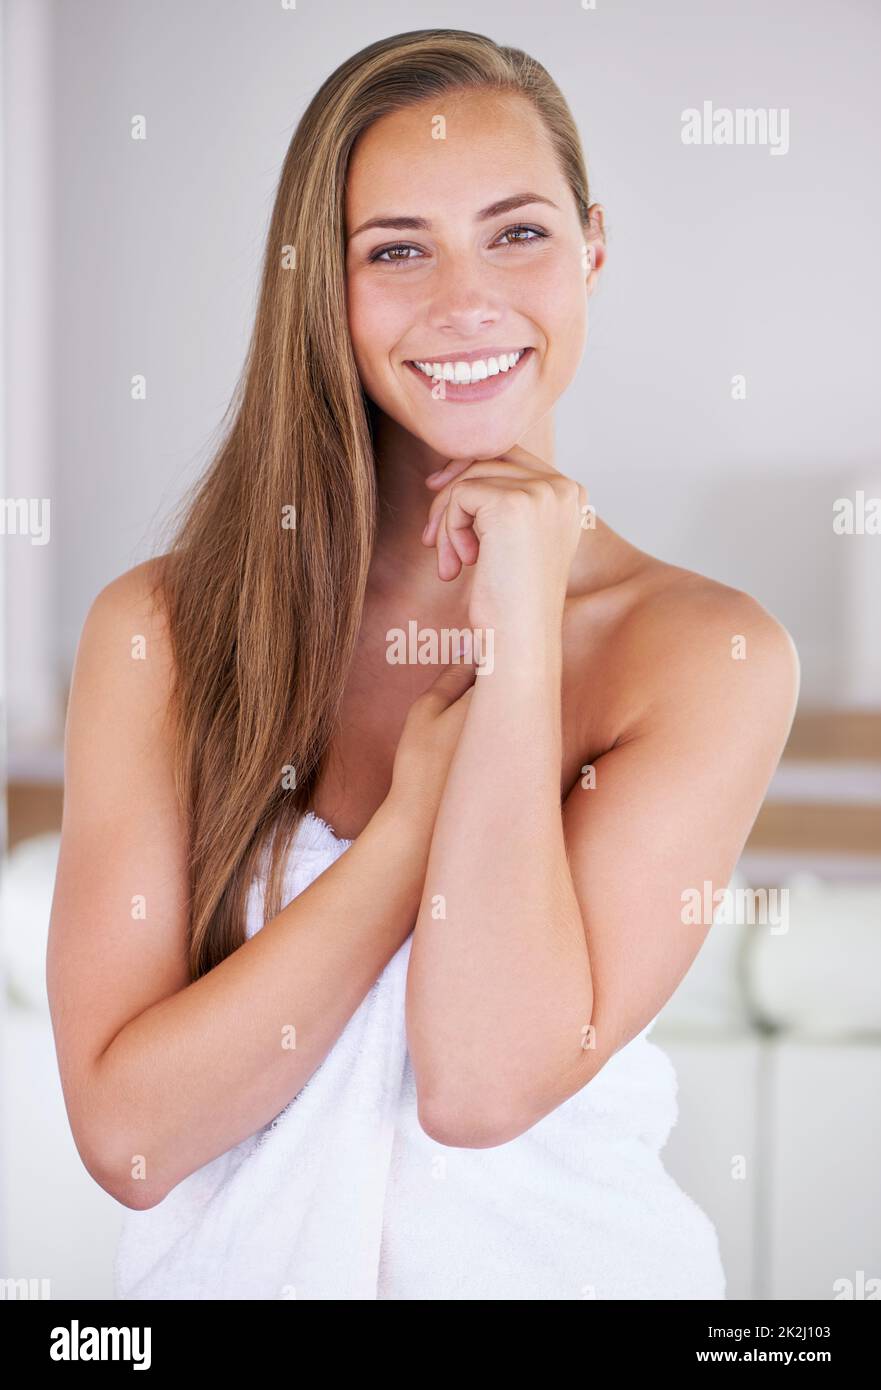 Soft and supple skin. Confident brunette woman posing in a towel. Stock Photo